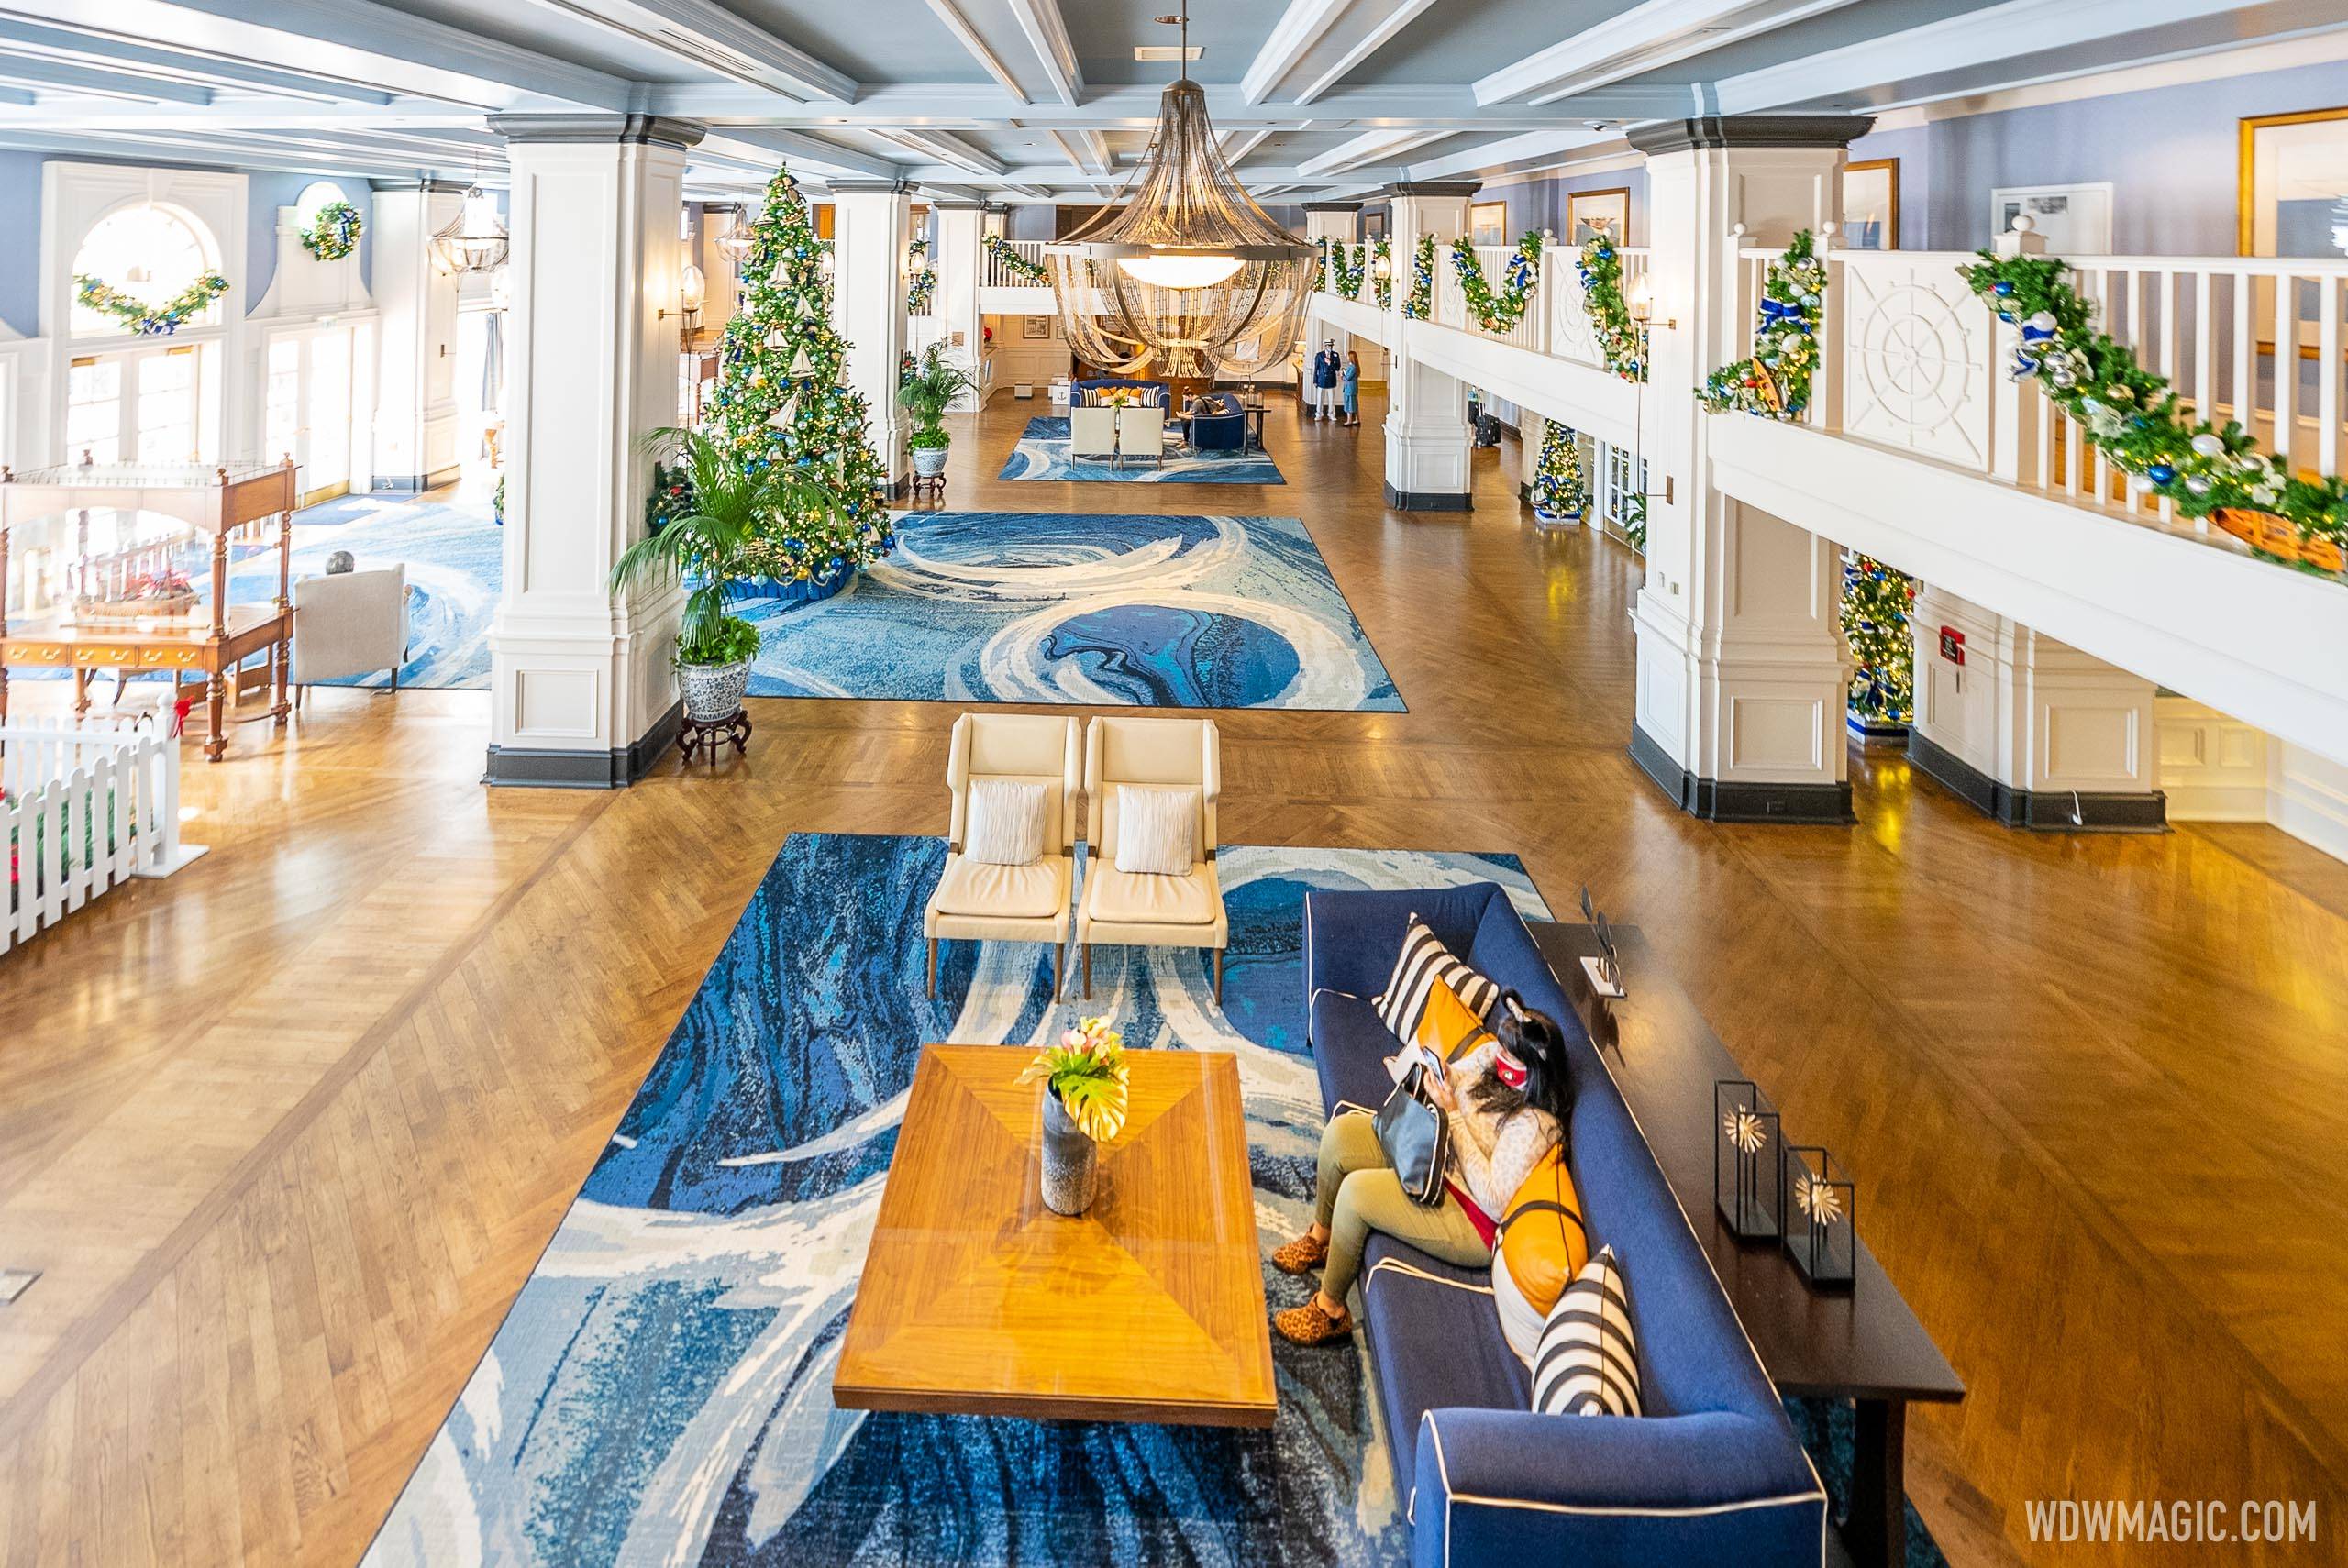 A wide view of the Yacht Club lobby during the holidays